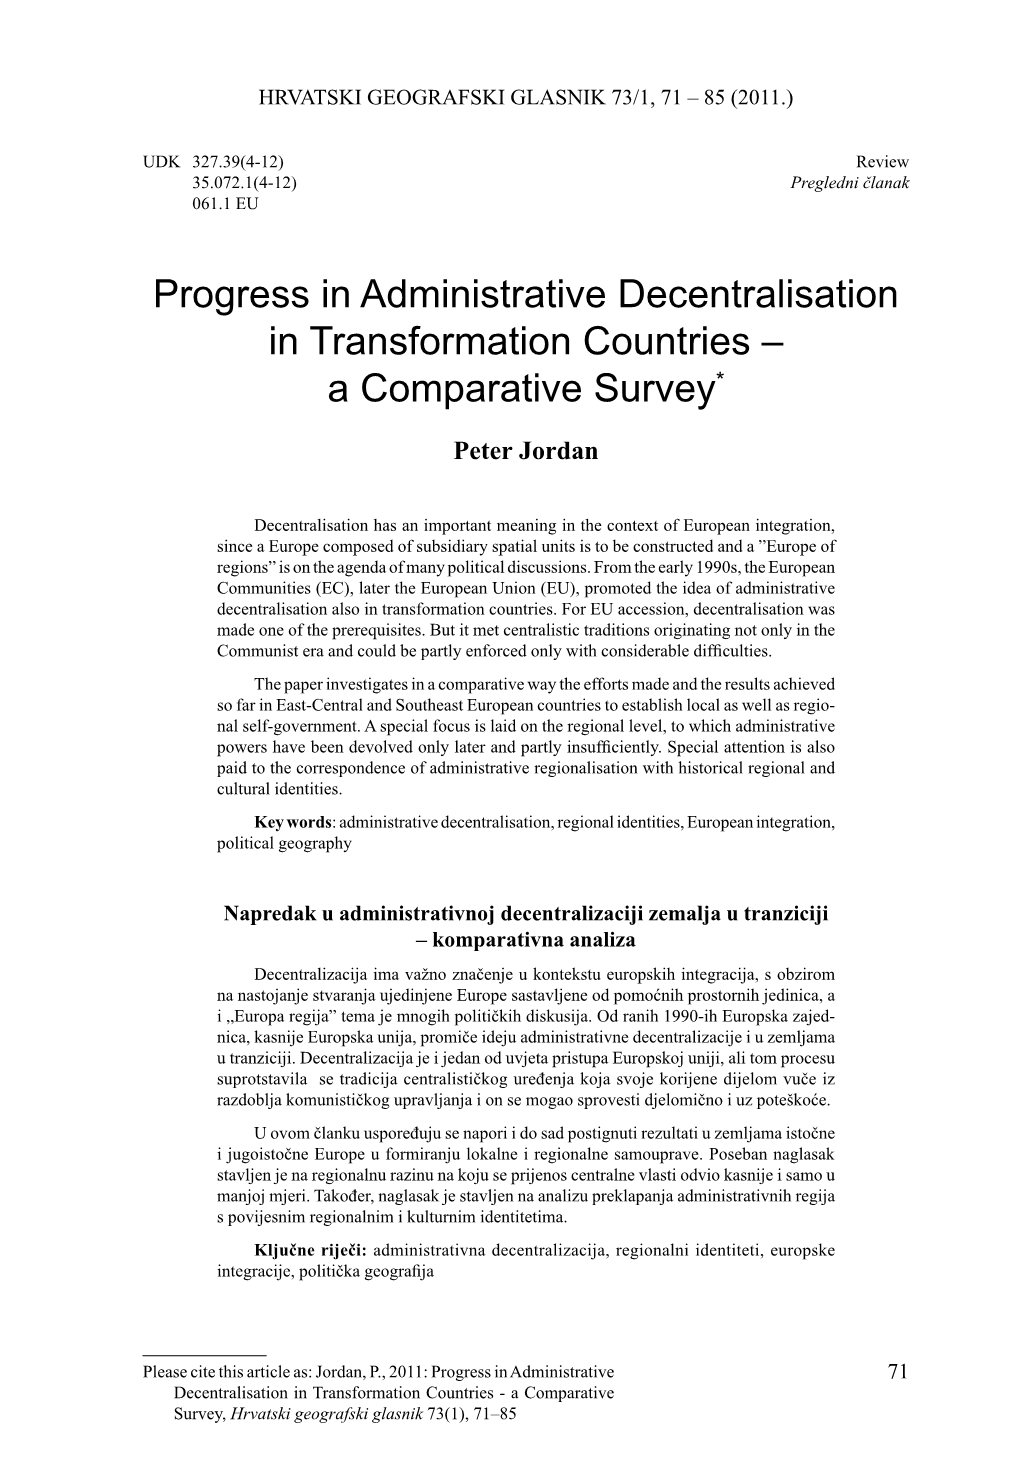 Progress in Administrative Decentralisation in Transformation Countries – a Comparative Survey*